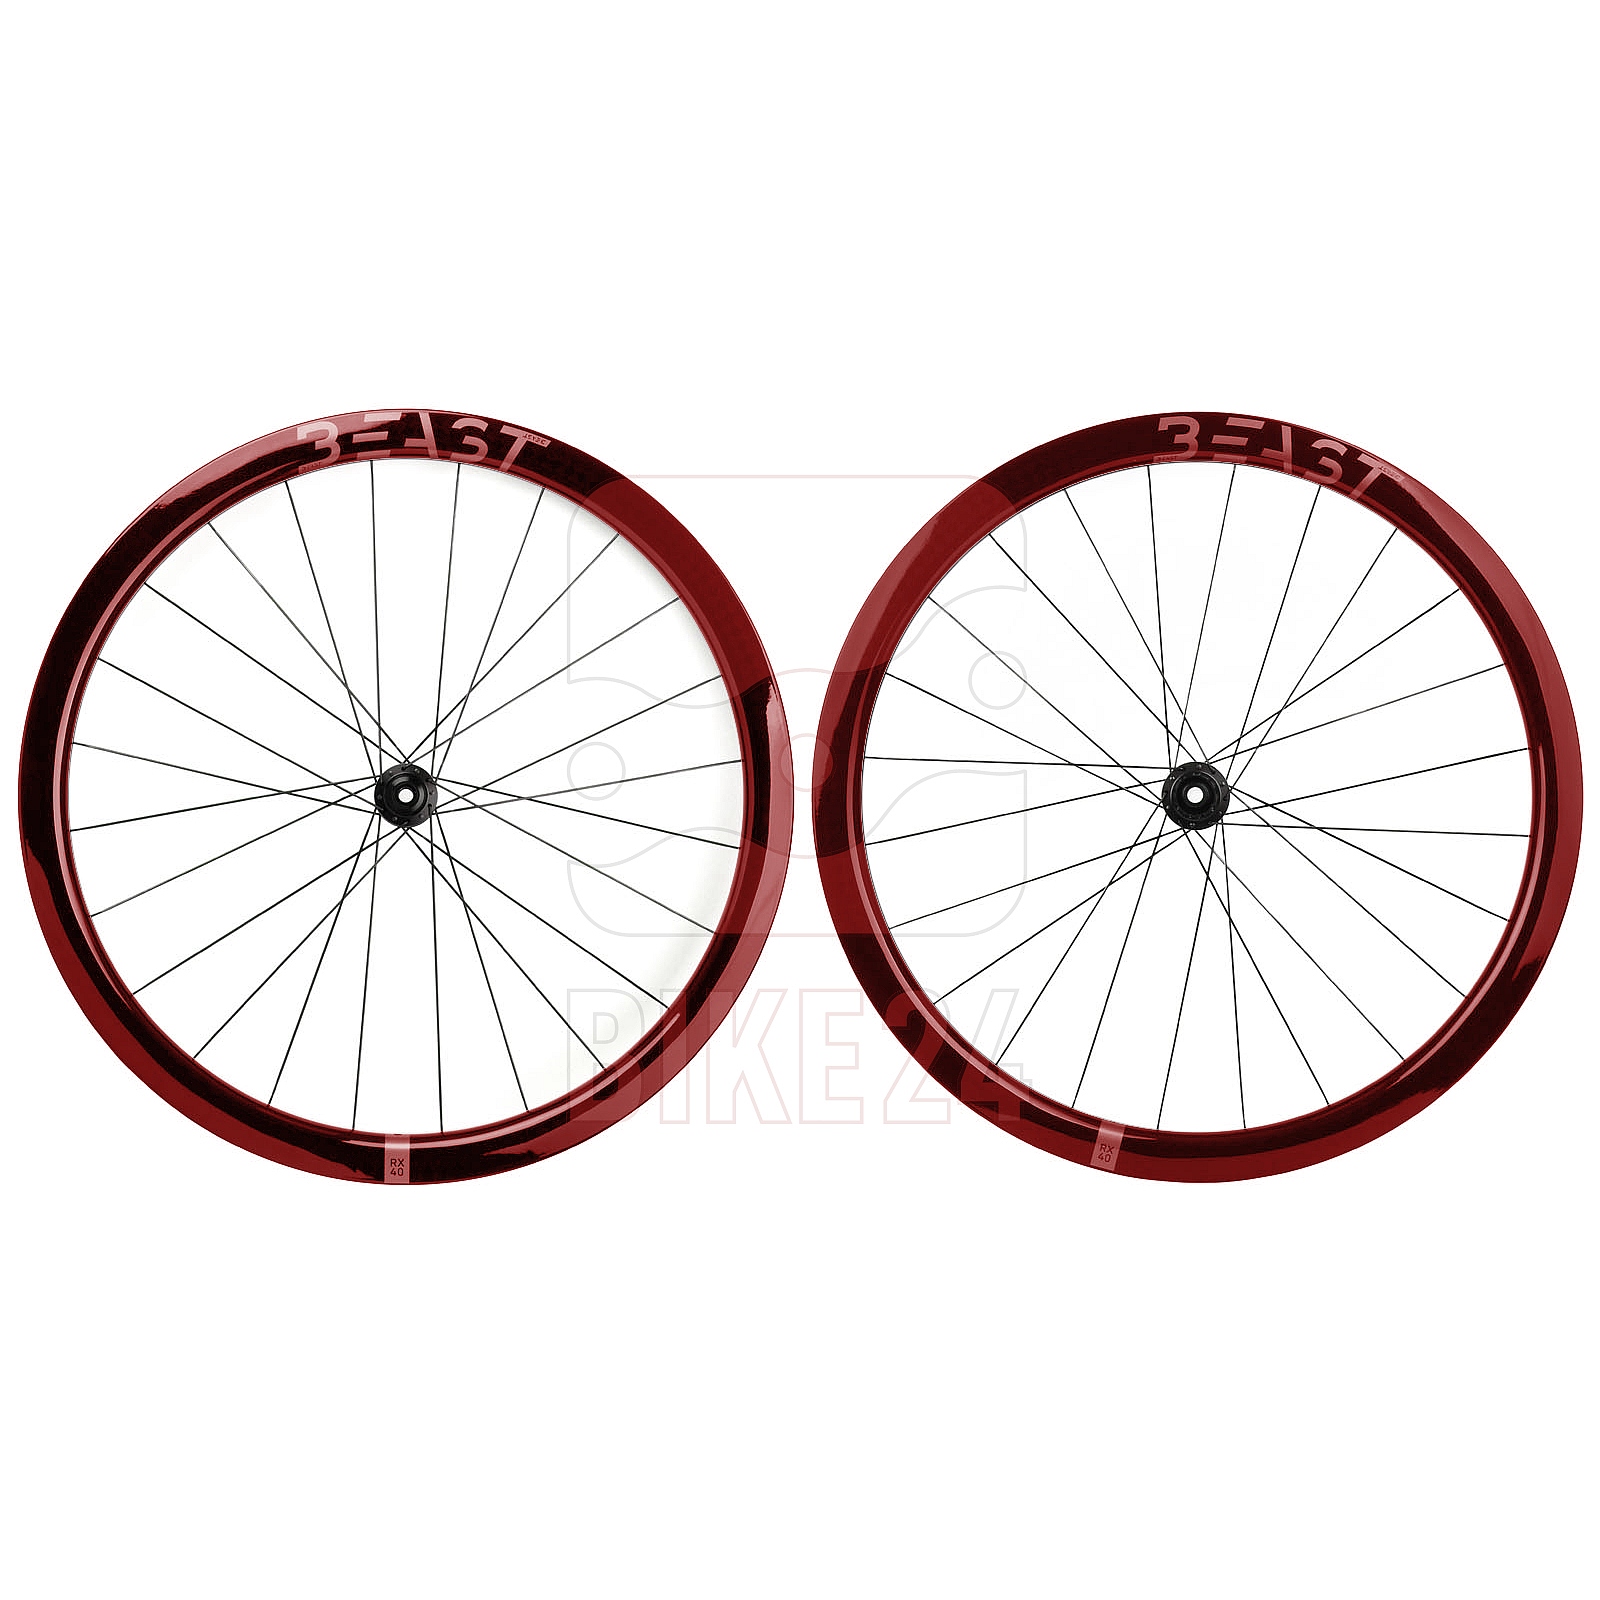 Image of Beast Components | DT Swiss - RX40 | 240 - Wheelset - 28" | Carbon | Clincher | Centerlock - 12x100mm | 12x142mm - HG-EV | UD red